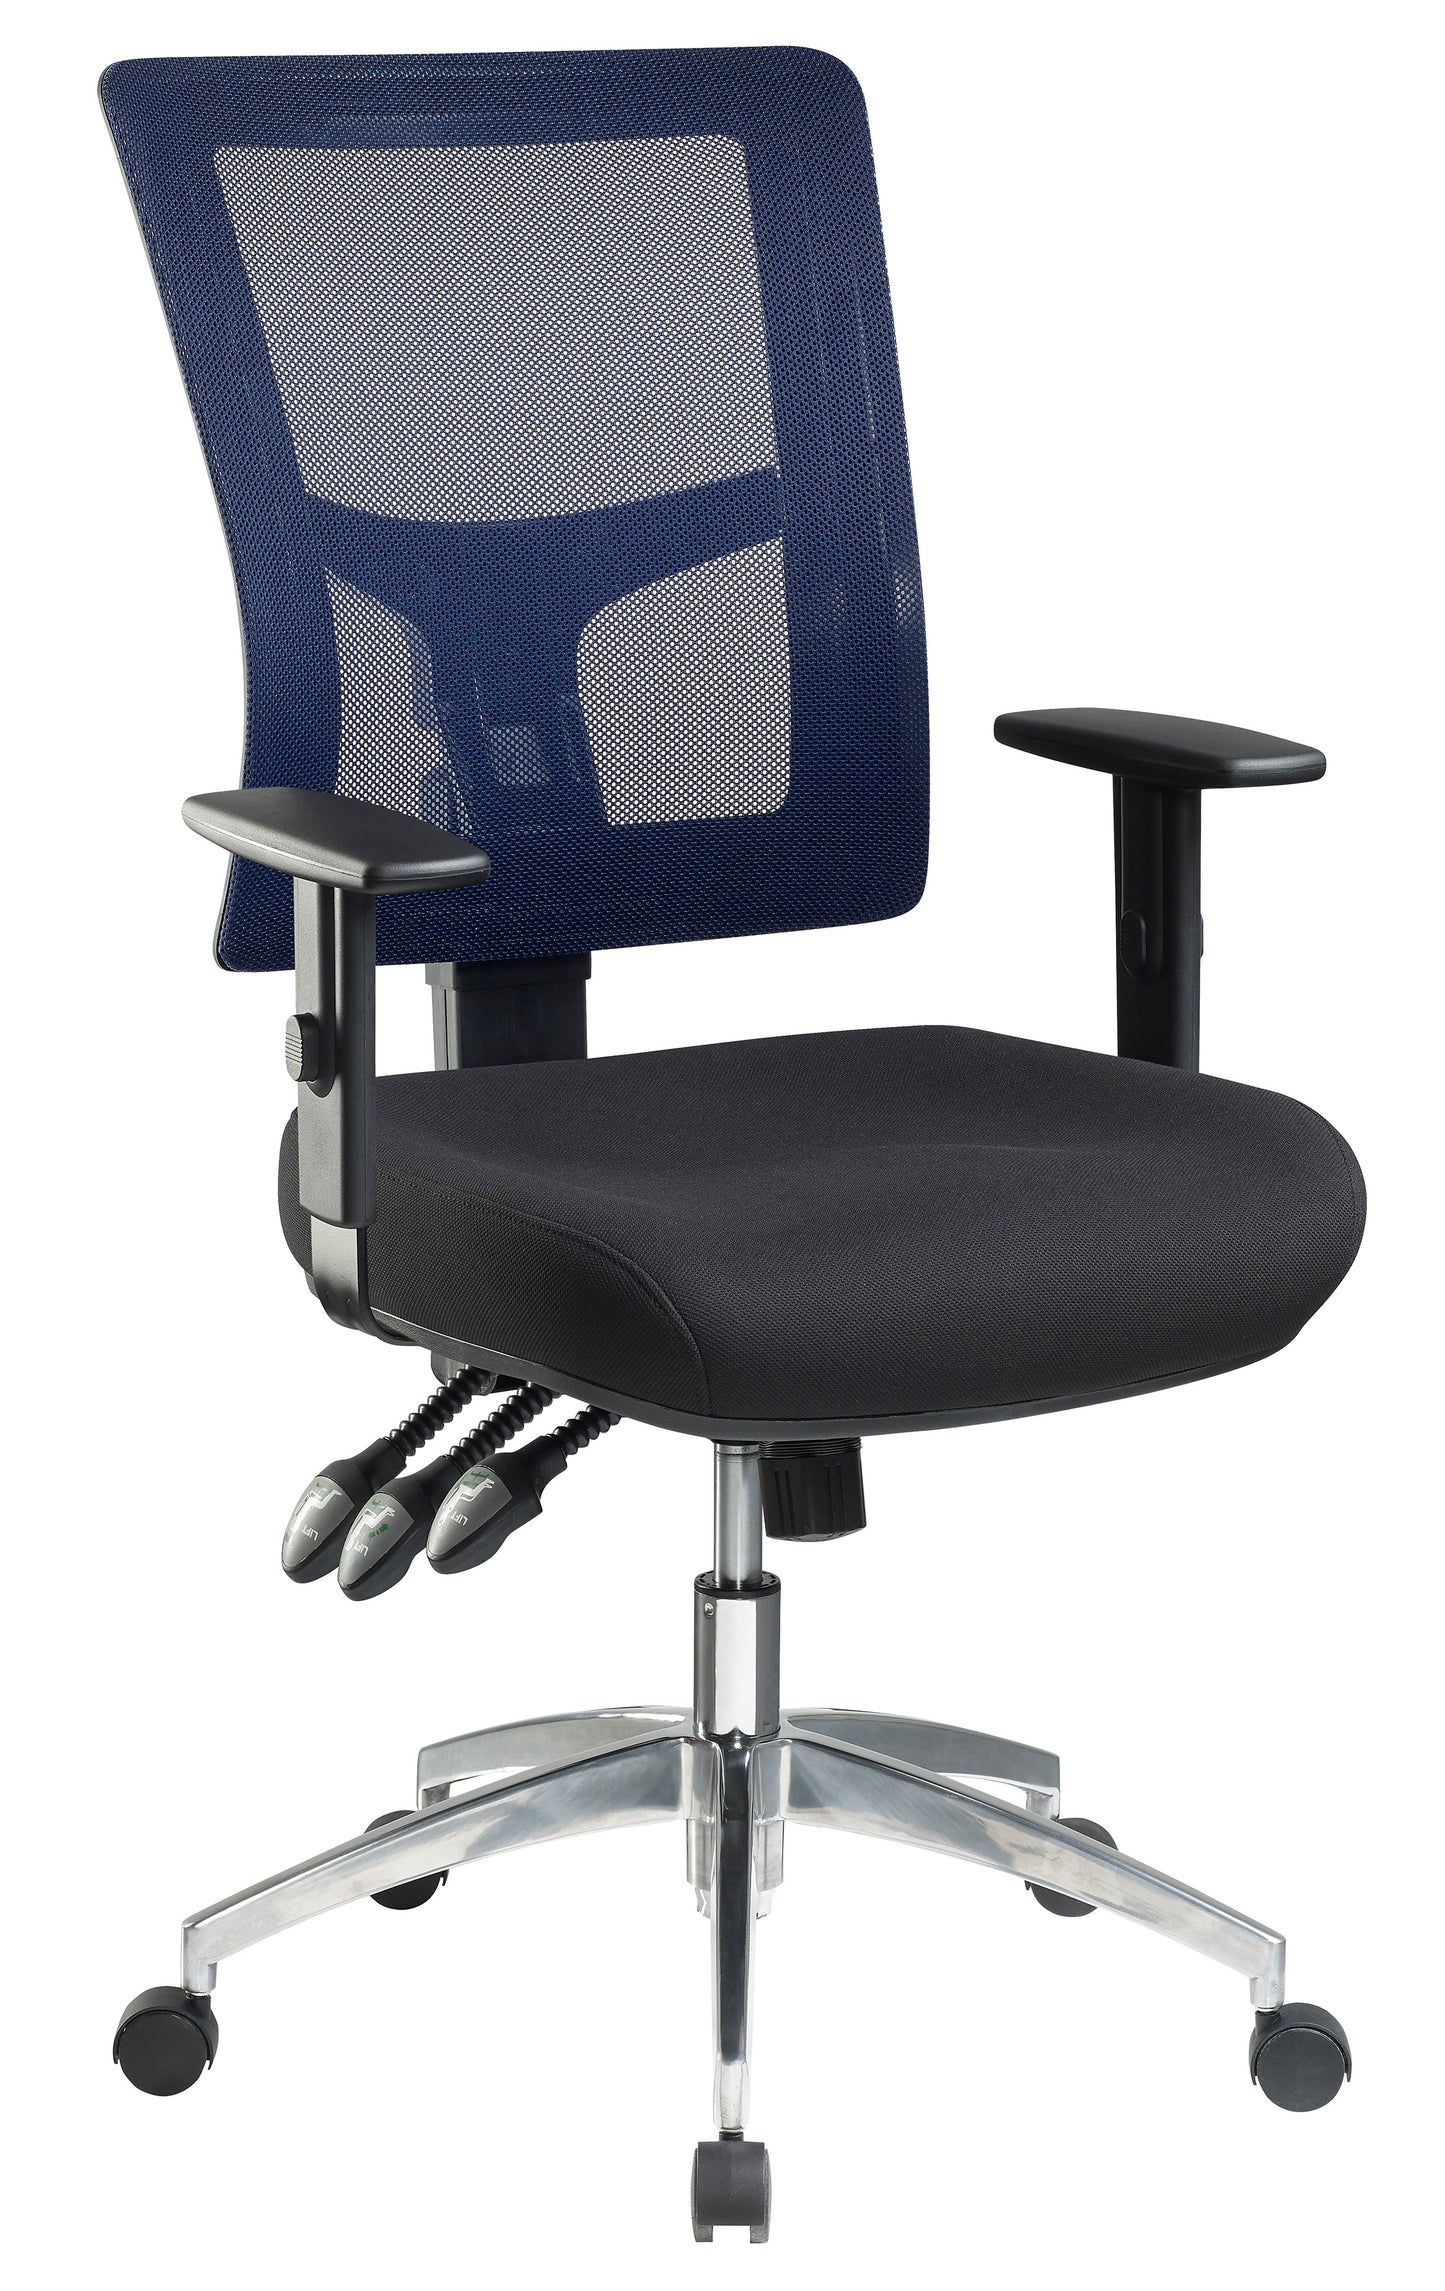 Chair - Enduro with Arms